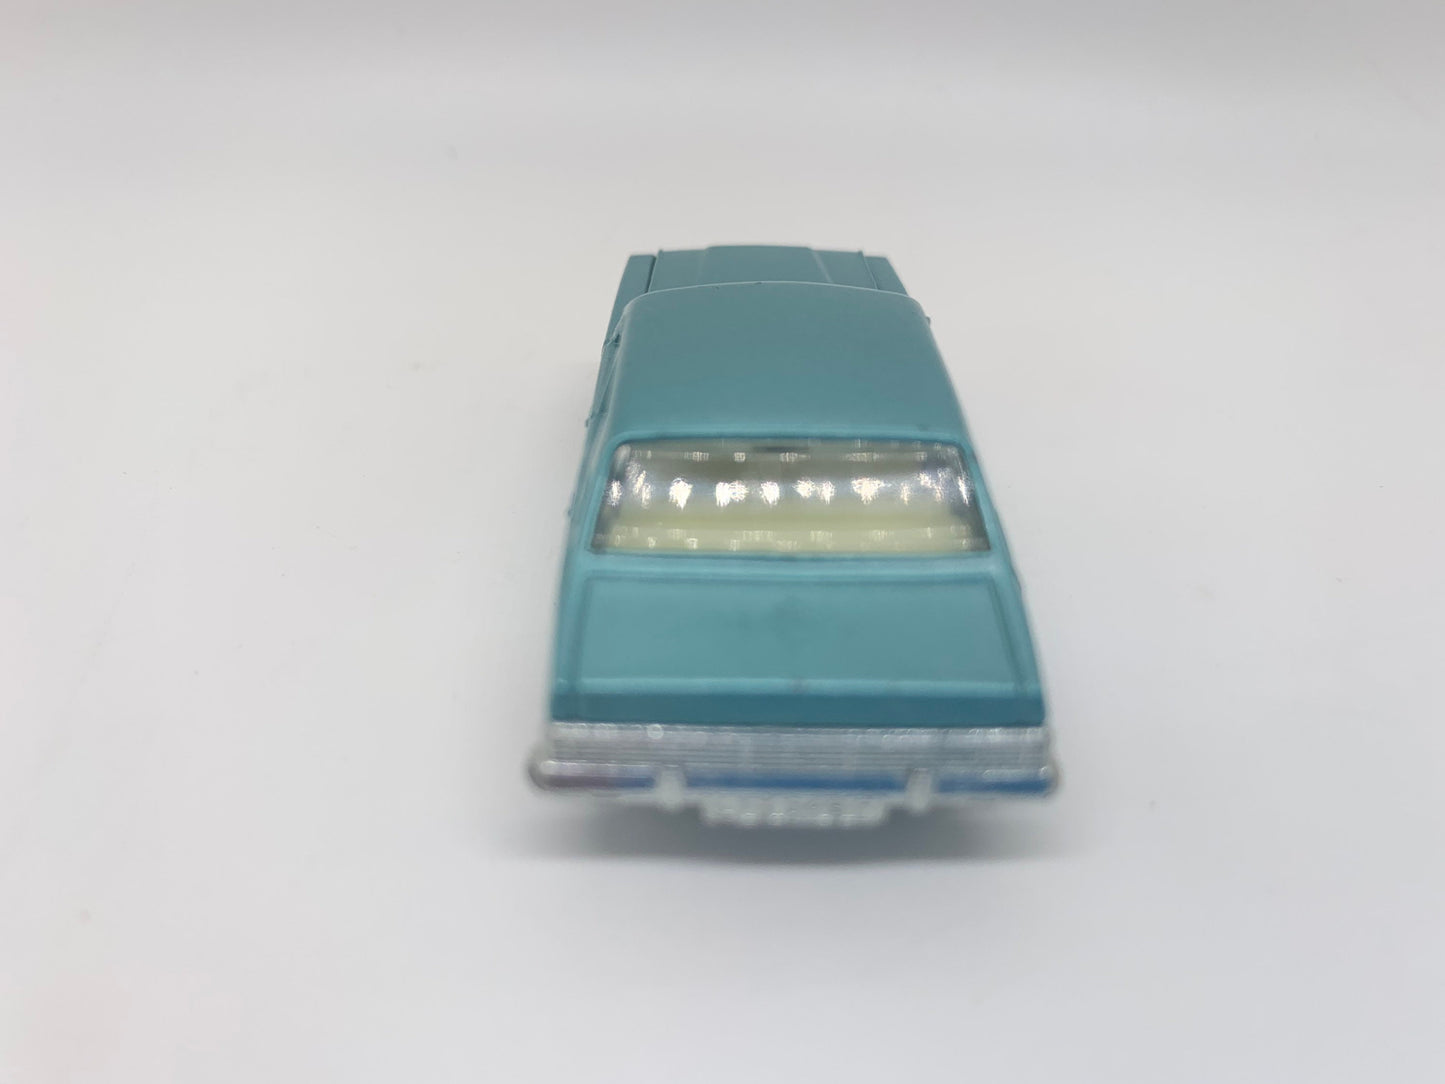 Matchbox 1968 Ford Zodiac Mark IV Blue Miniature Collectable Scale Model Toy Car Perfect Birthday Gift